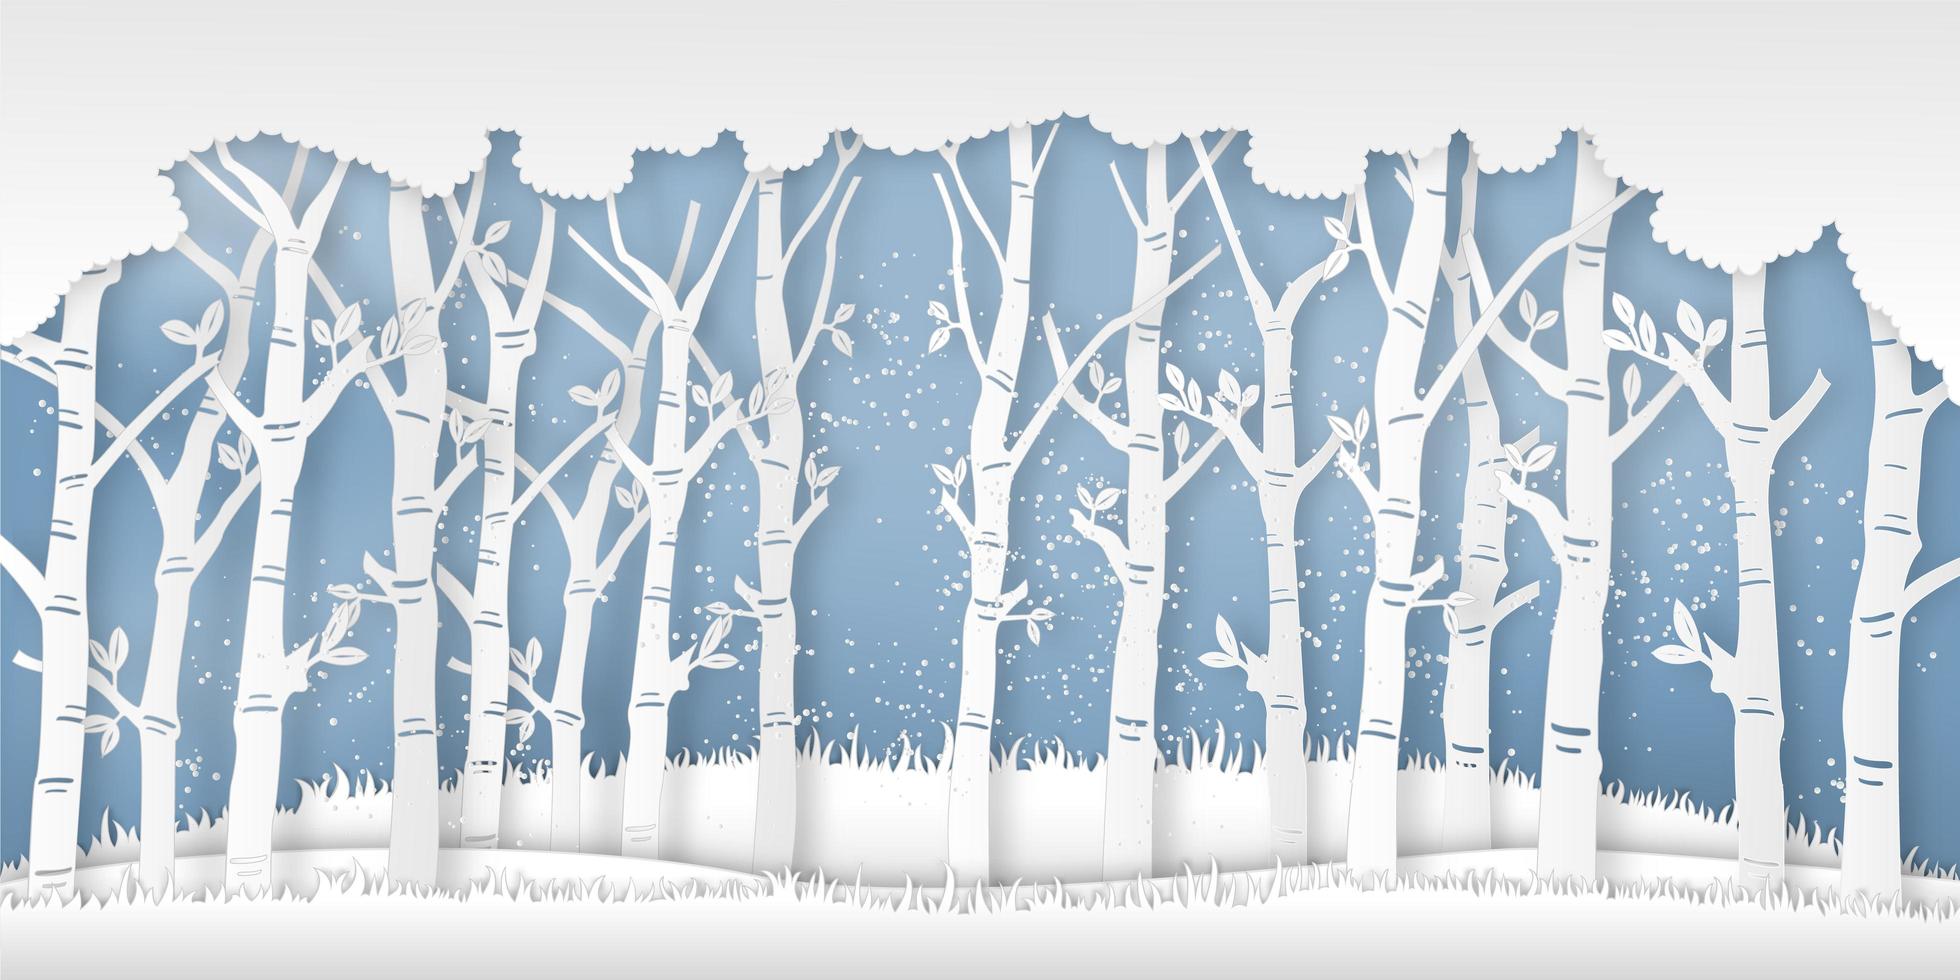 Paper cut winter season scene with trees and snow vector